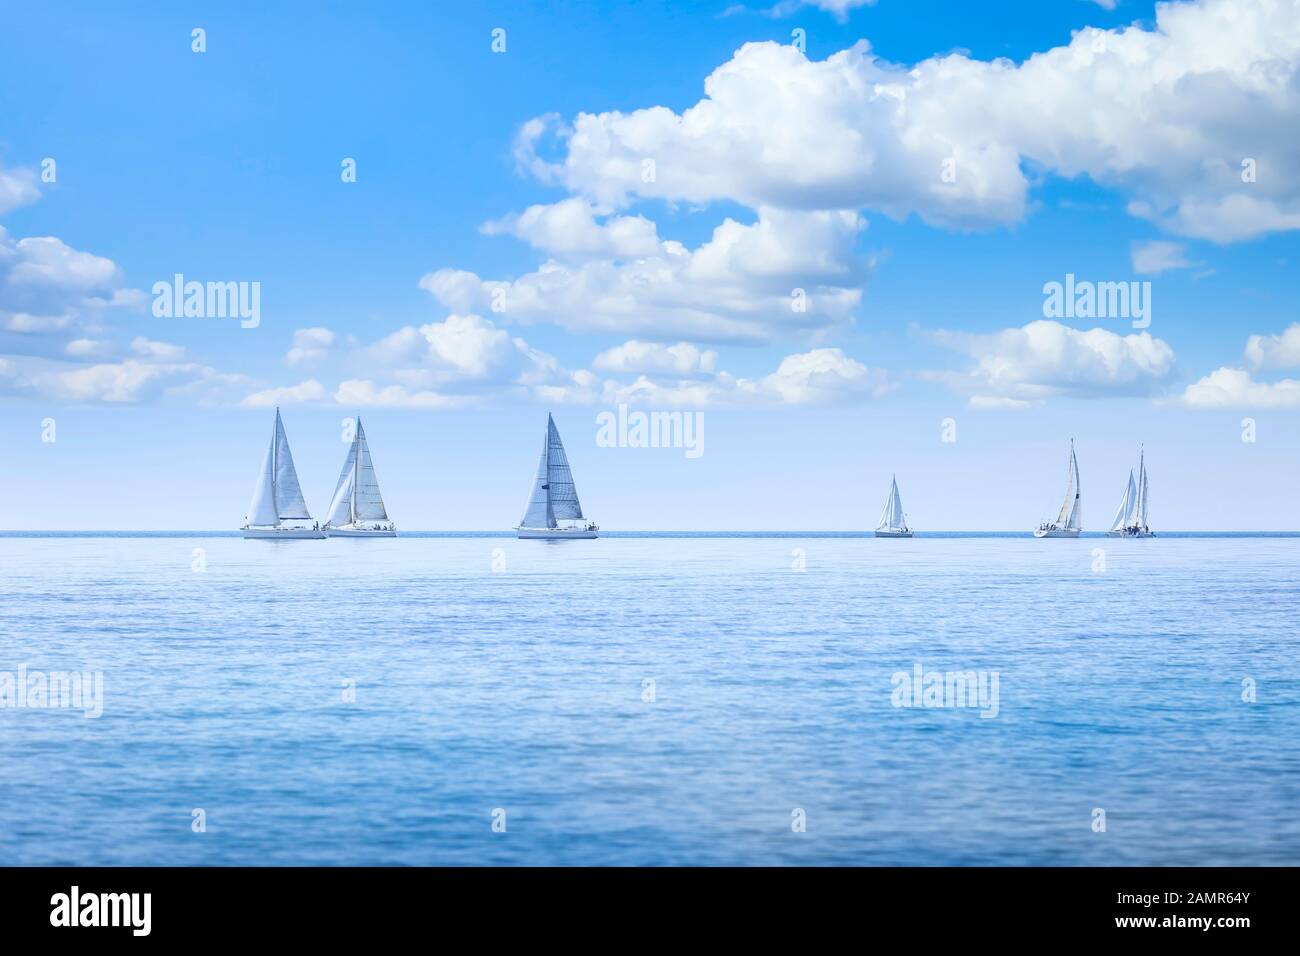 Sailing boat yacht or sailboat group regatta race on sea or ocean water. Panoramic view. Stock Photo